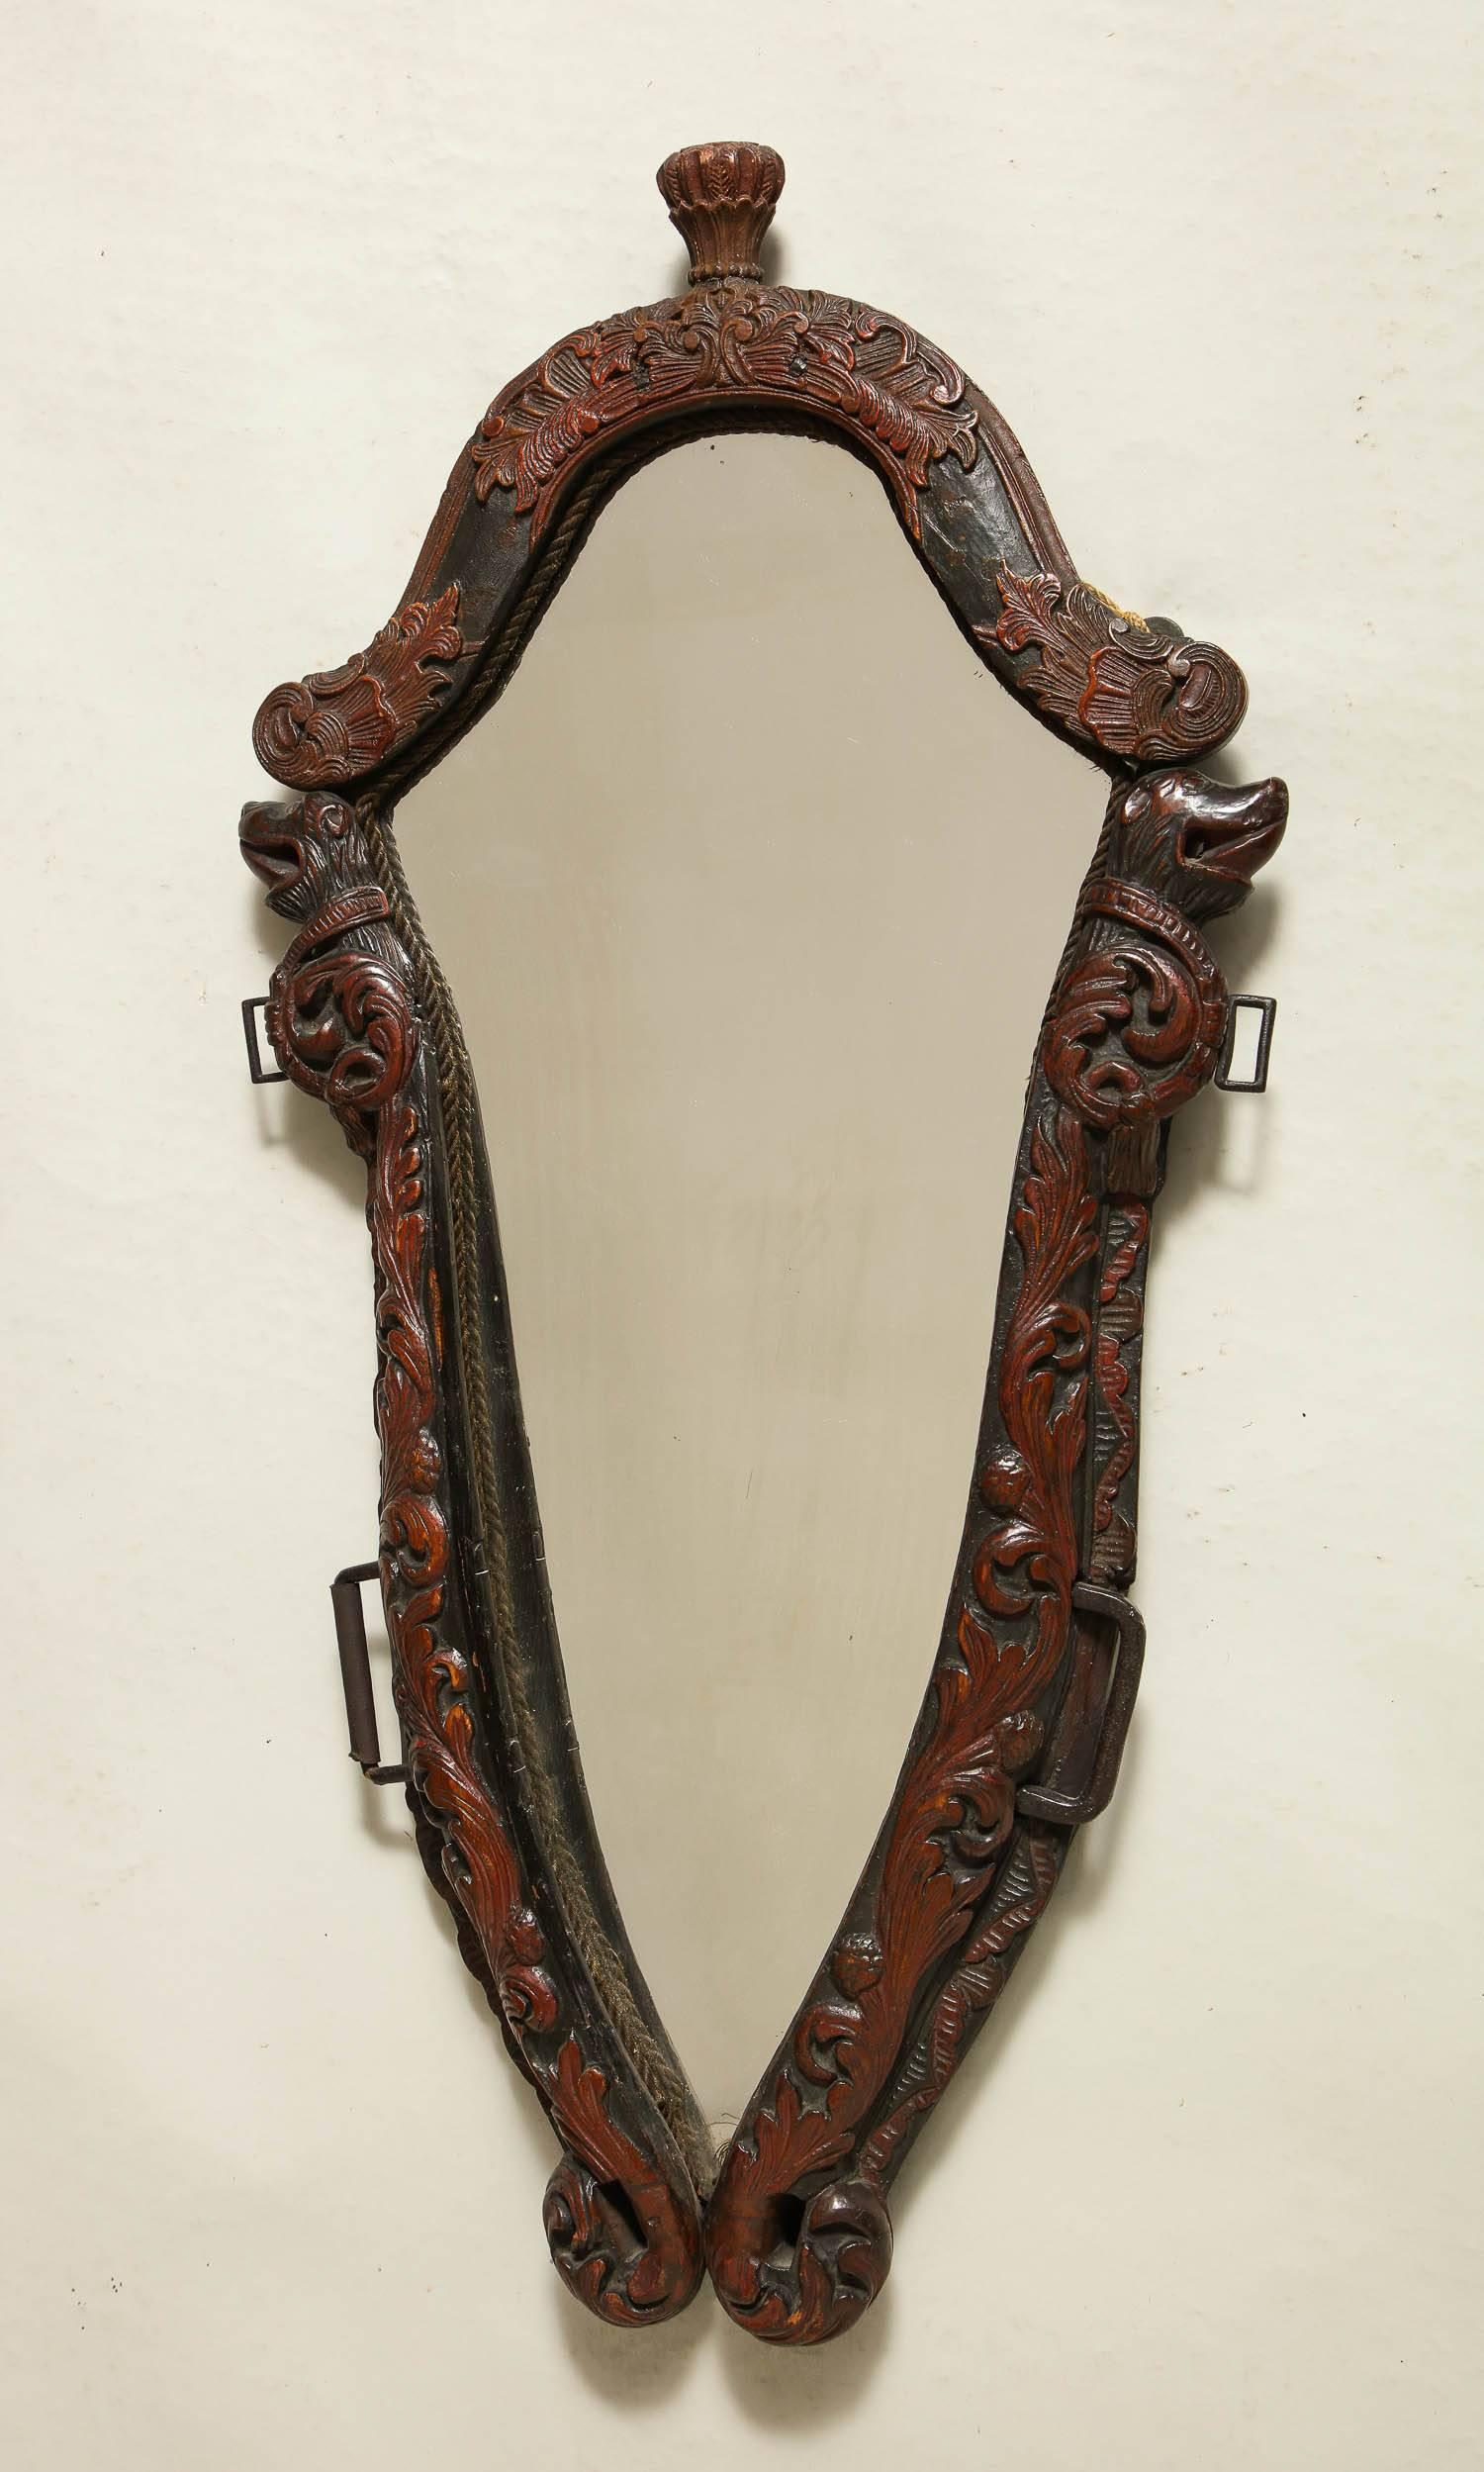 Unusual Norwegian Folk Art mirror constructed from an 18th century horse harness or “haim” having bear or lion faces and foliate carving and original paint. It was made into a mirror, circa 1910.